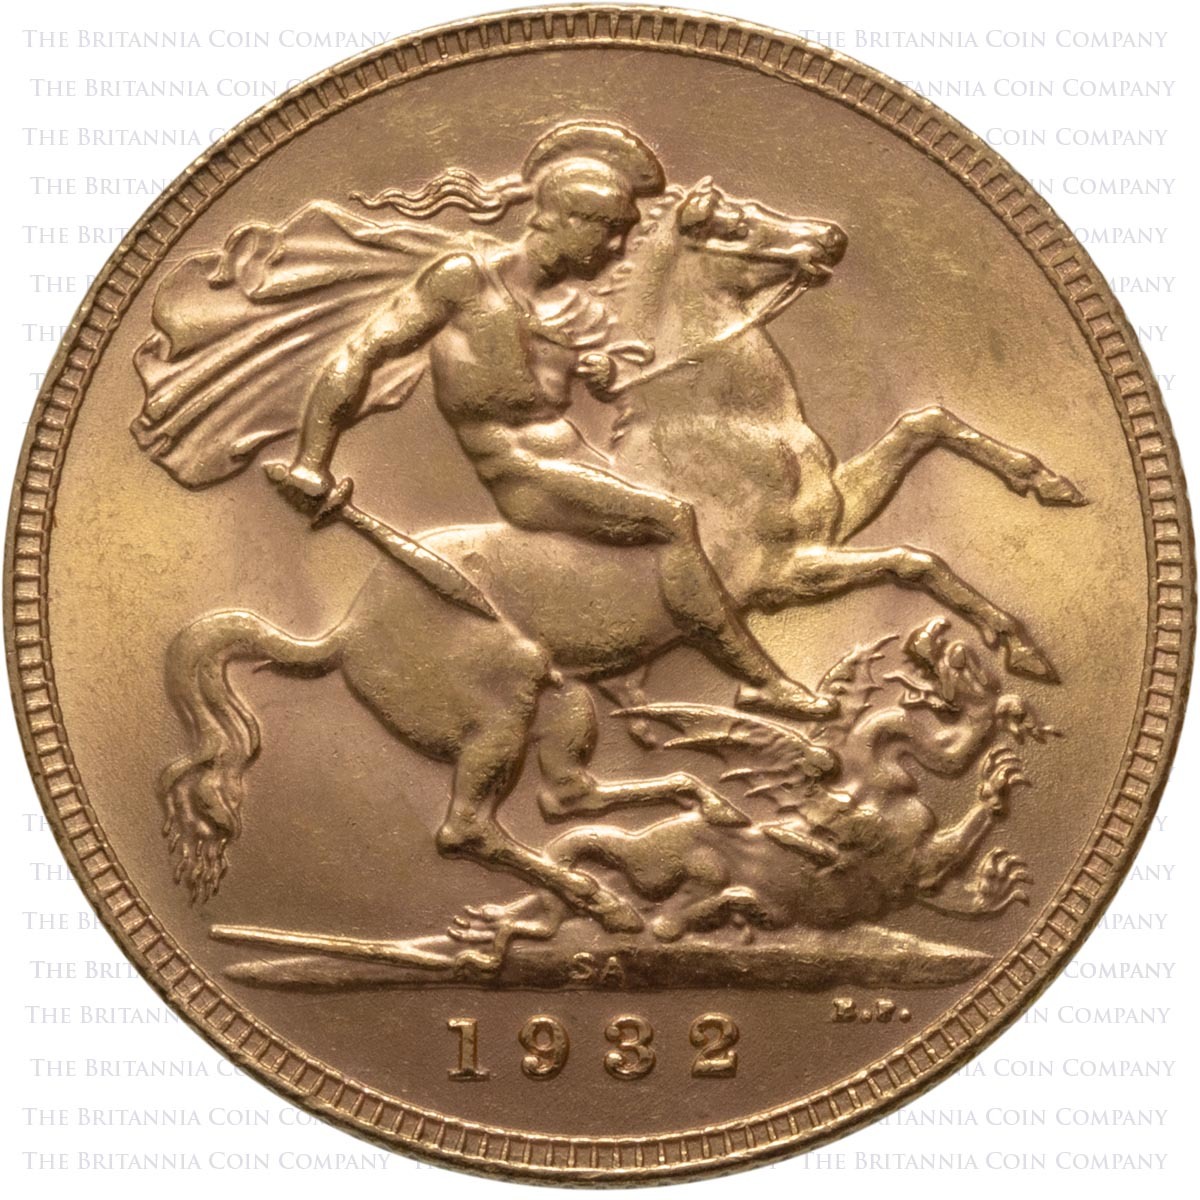 1932 King George V Gold Full Sovereigns Pretoria South Africa Mint (Best Value) Reverse